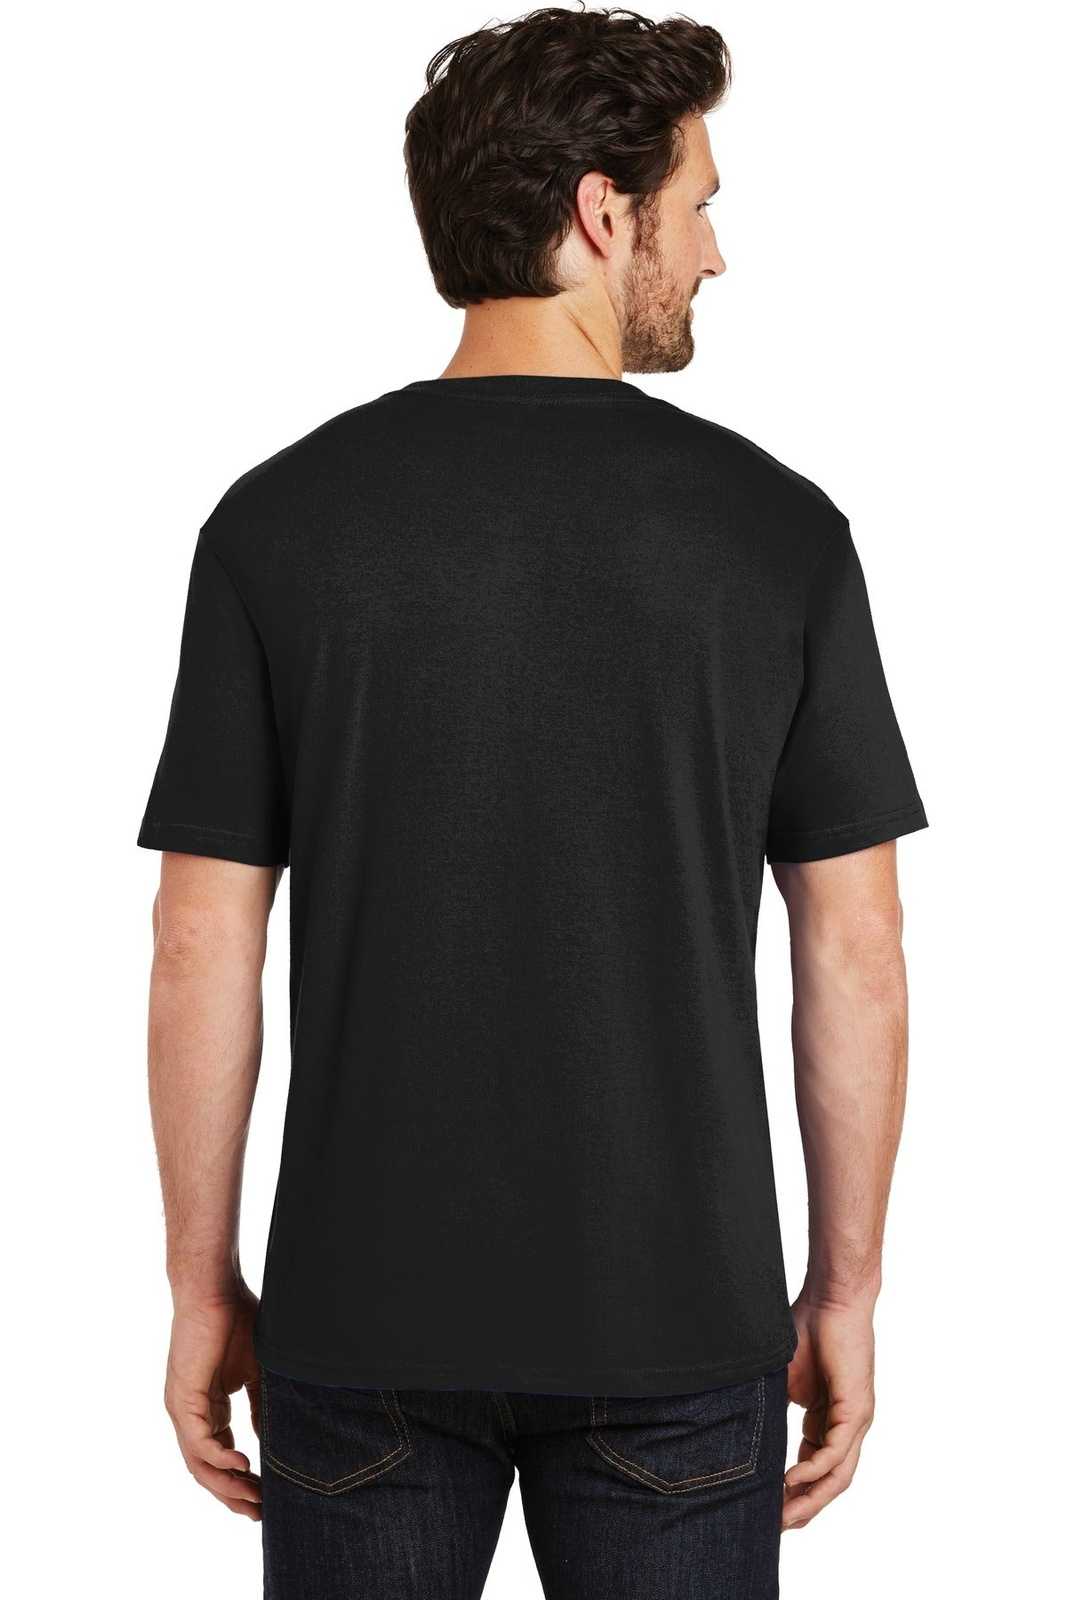 District DT104 Perfect Weight Tee - Jet Black - HIT a Double - 2